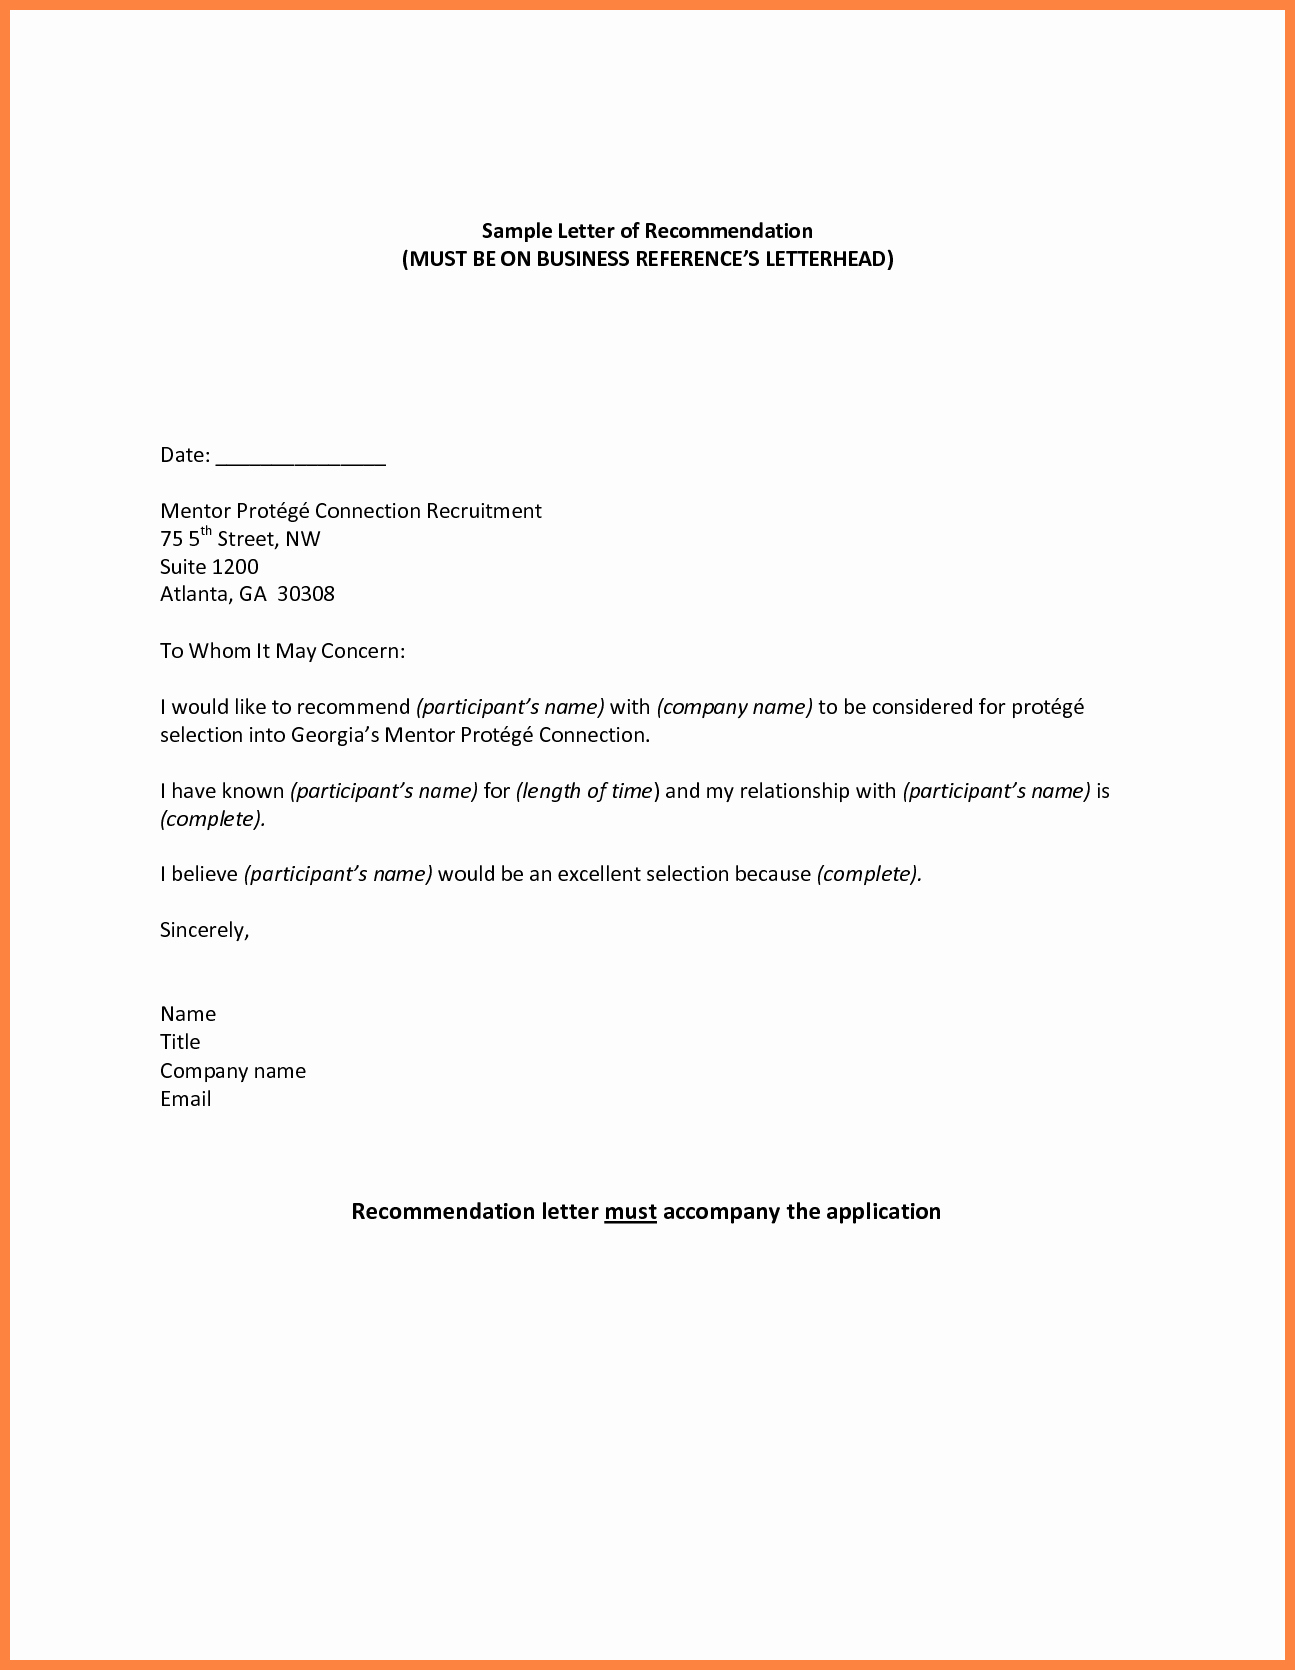 Letterhead for Letter Of Recommendation Awesome 9 Re Mendation Letter Sample for Pany